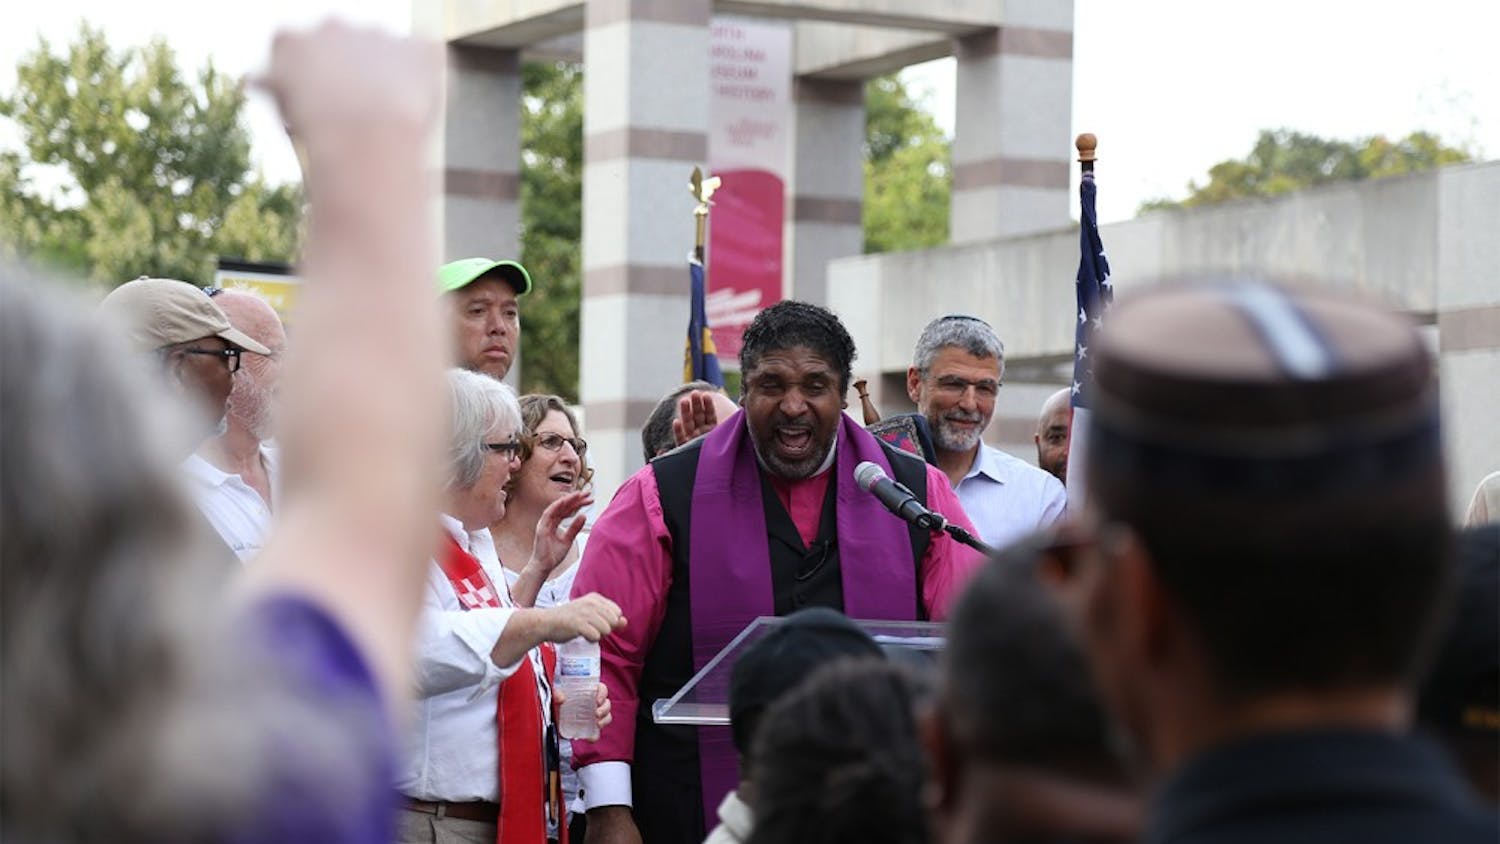 Rev. Dr. William J. Barber II speaks about the history of voters' rights in the U.S. at the rally on Thursday. 

The NAACP lead a march and rally in Raleigh on Thursday as part of "America's Journey for Justice," a 806-mile march from Selma, Alabama, to Washington D.C. Hundreds gathered in the Bicentennial Plaza to protest for voters' rights. 